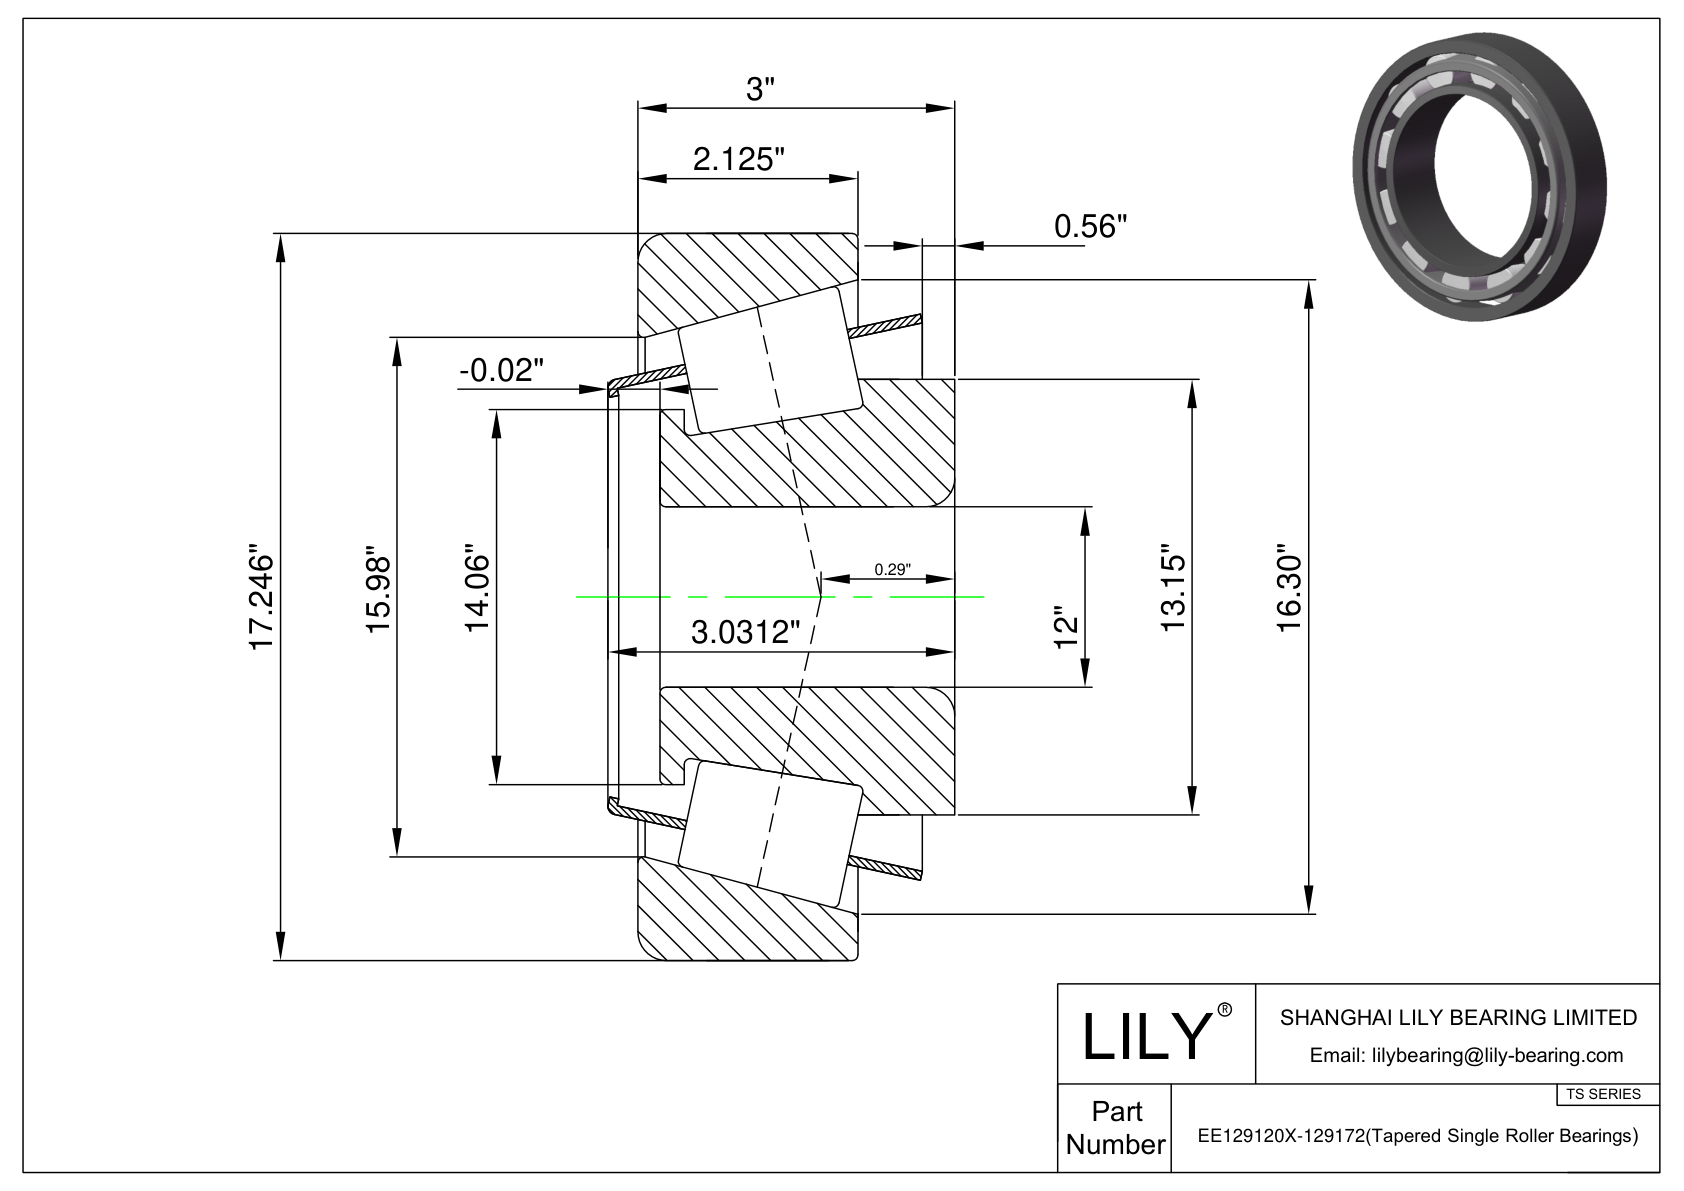 EE129120X-129172 TS (Tapered Single Roller Bearings) (Imperial) cad drawing